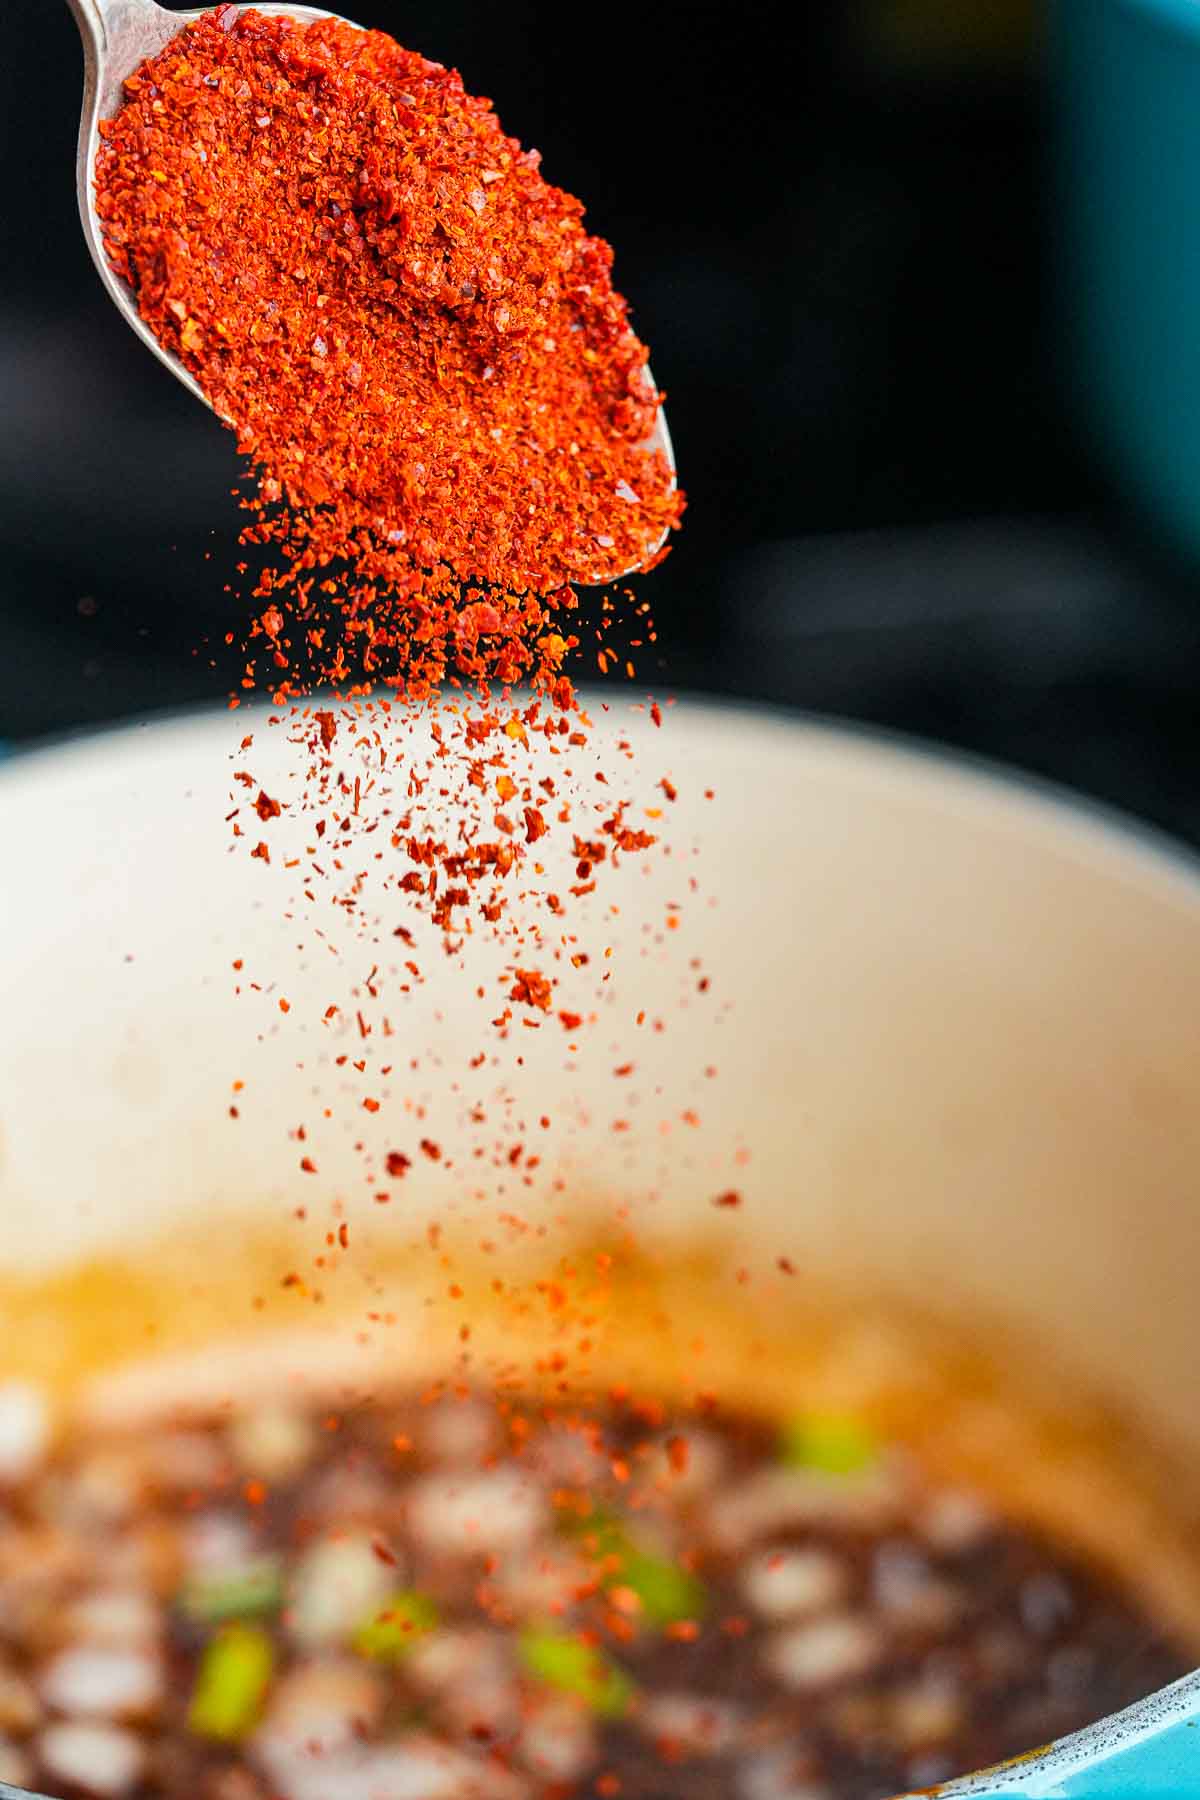 A spoonful of Korean chili powder being poured into a pot.